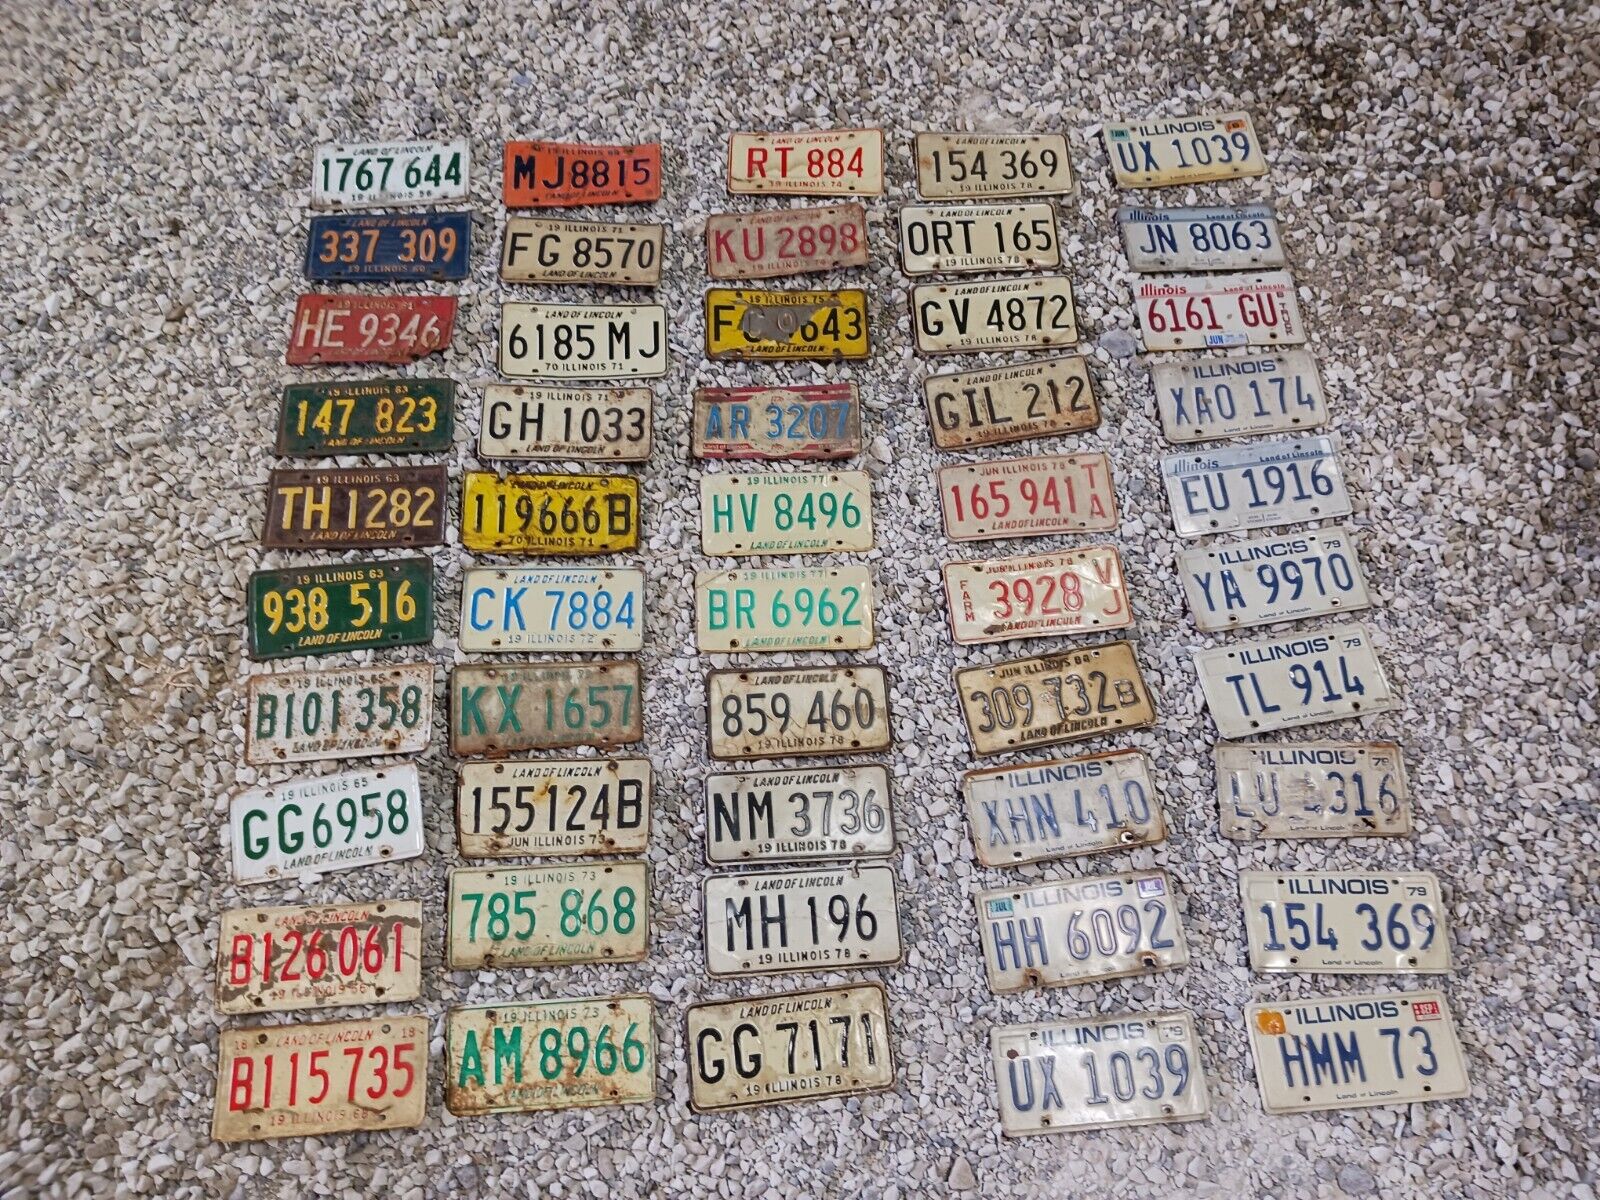 50 Illinois Roadkill License Plates Ranging from Years 1956 - UP Scratched Bent